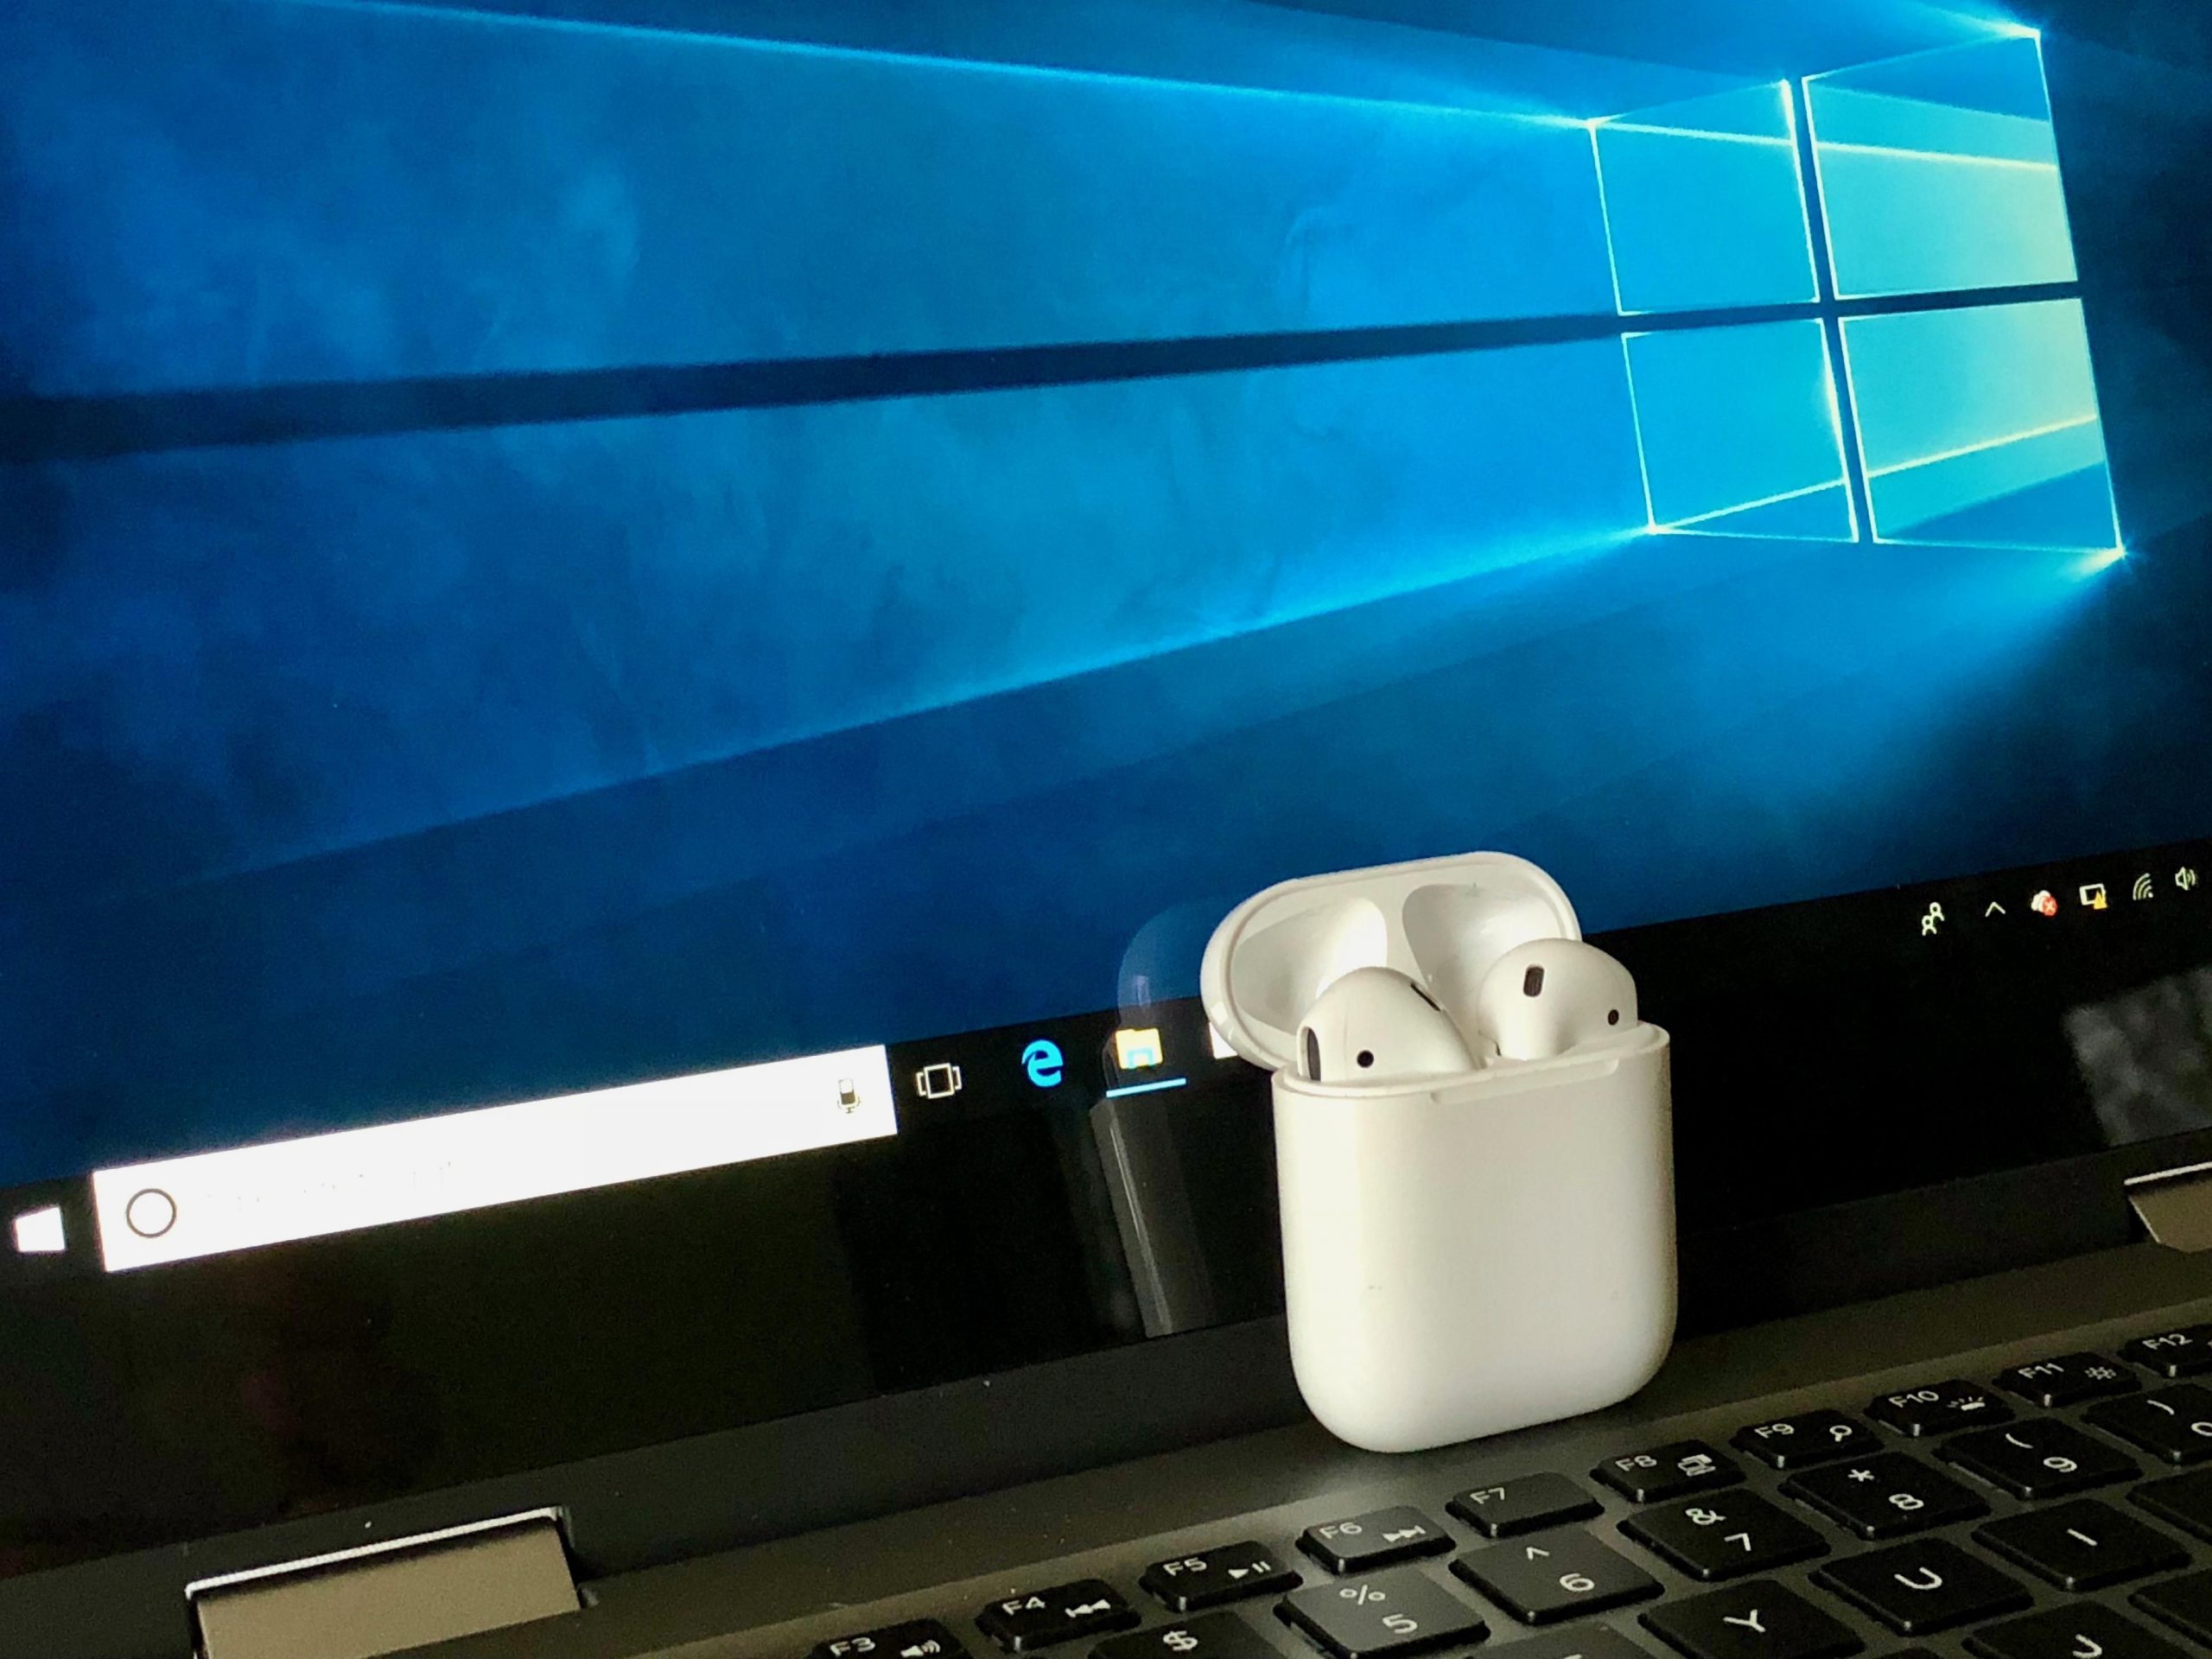 How to connect airpods to windows laptop